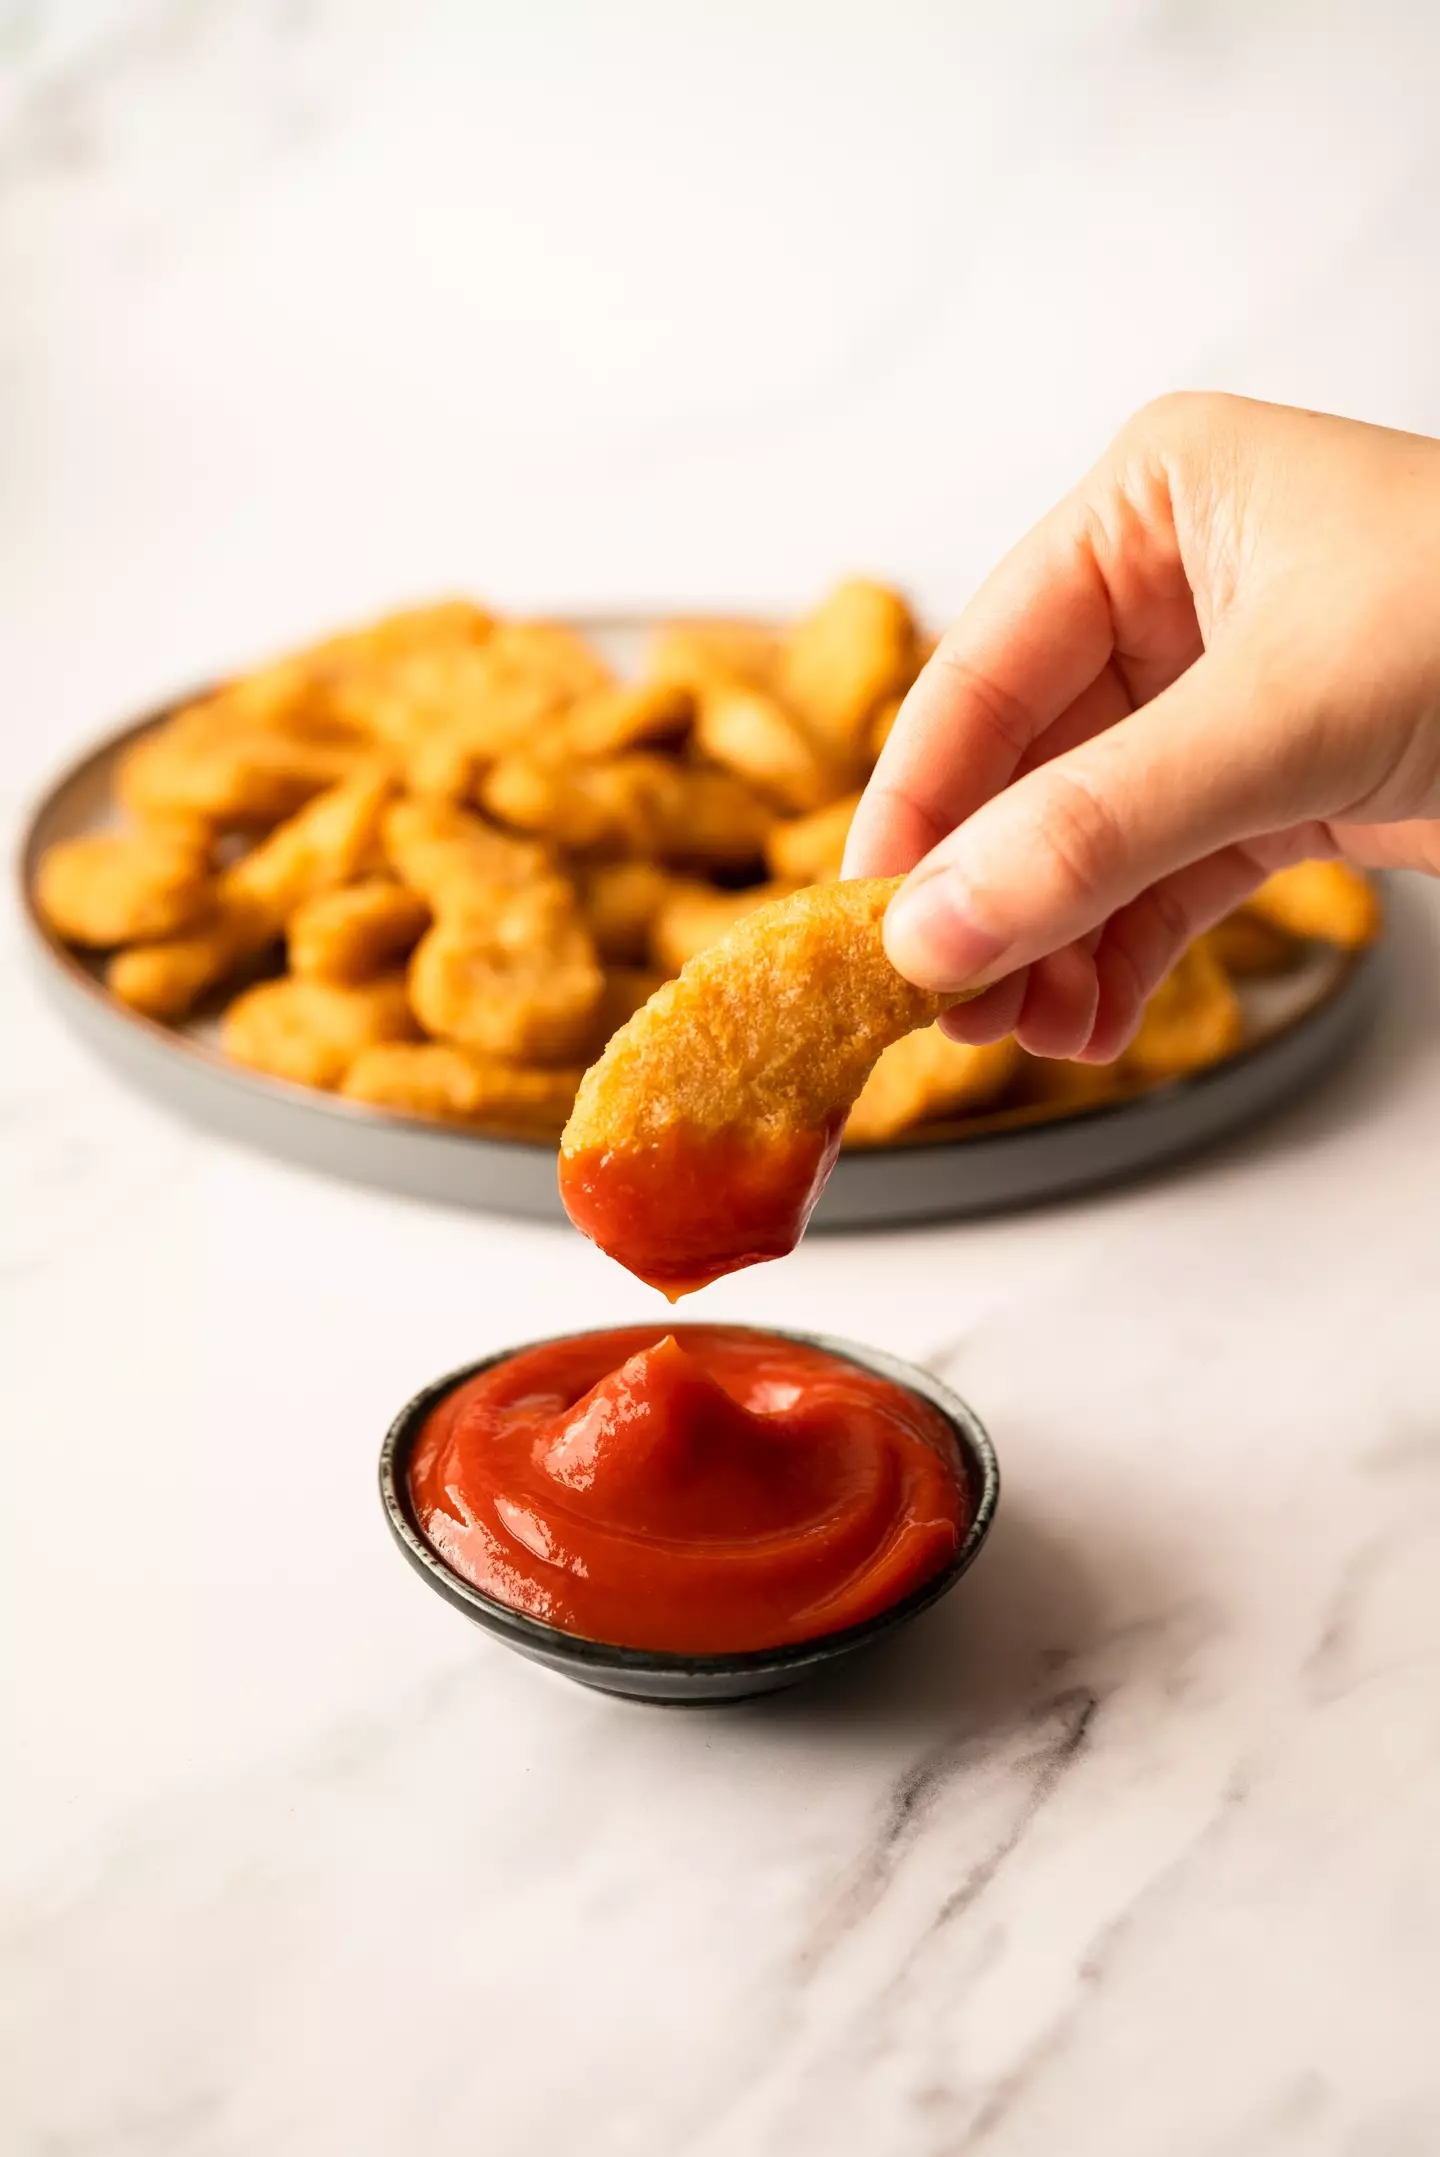 60 per cent believe ketchup to be the best dipping sauce (